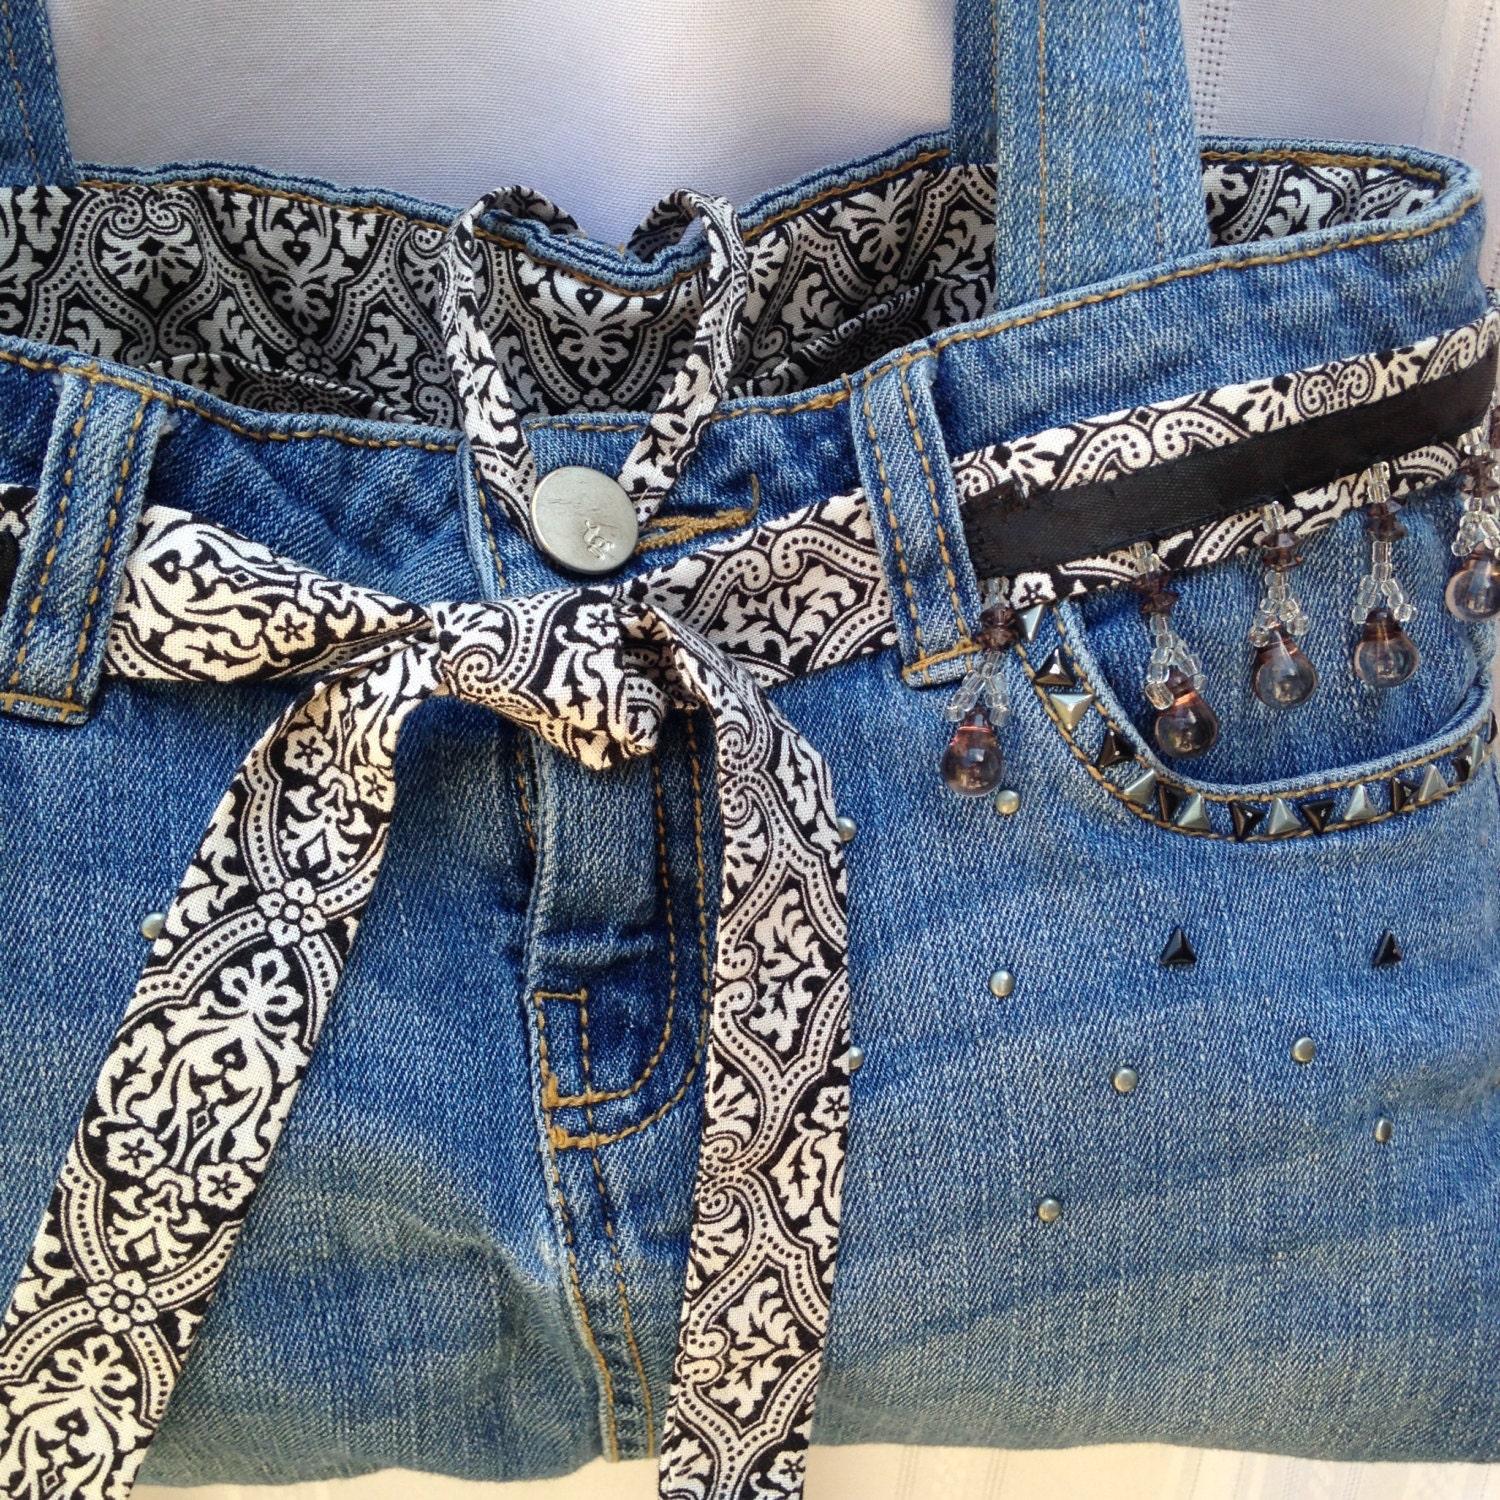 Recycled Denim Jean Purse by FancythisandthatShop on Etsy